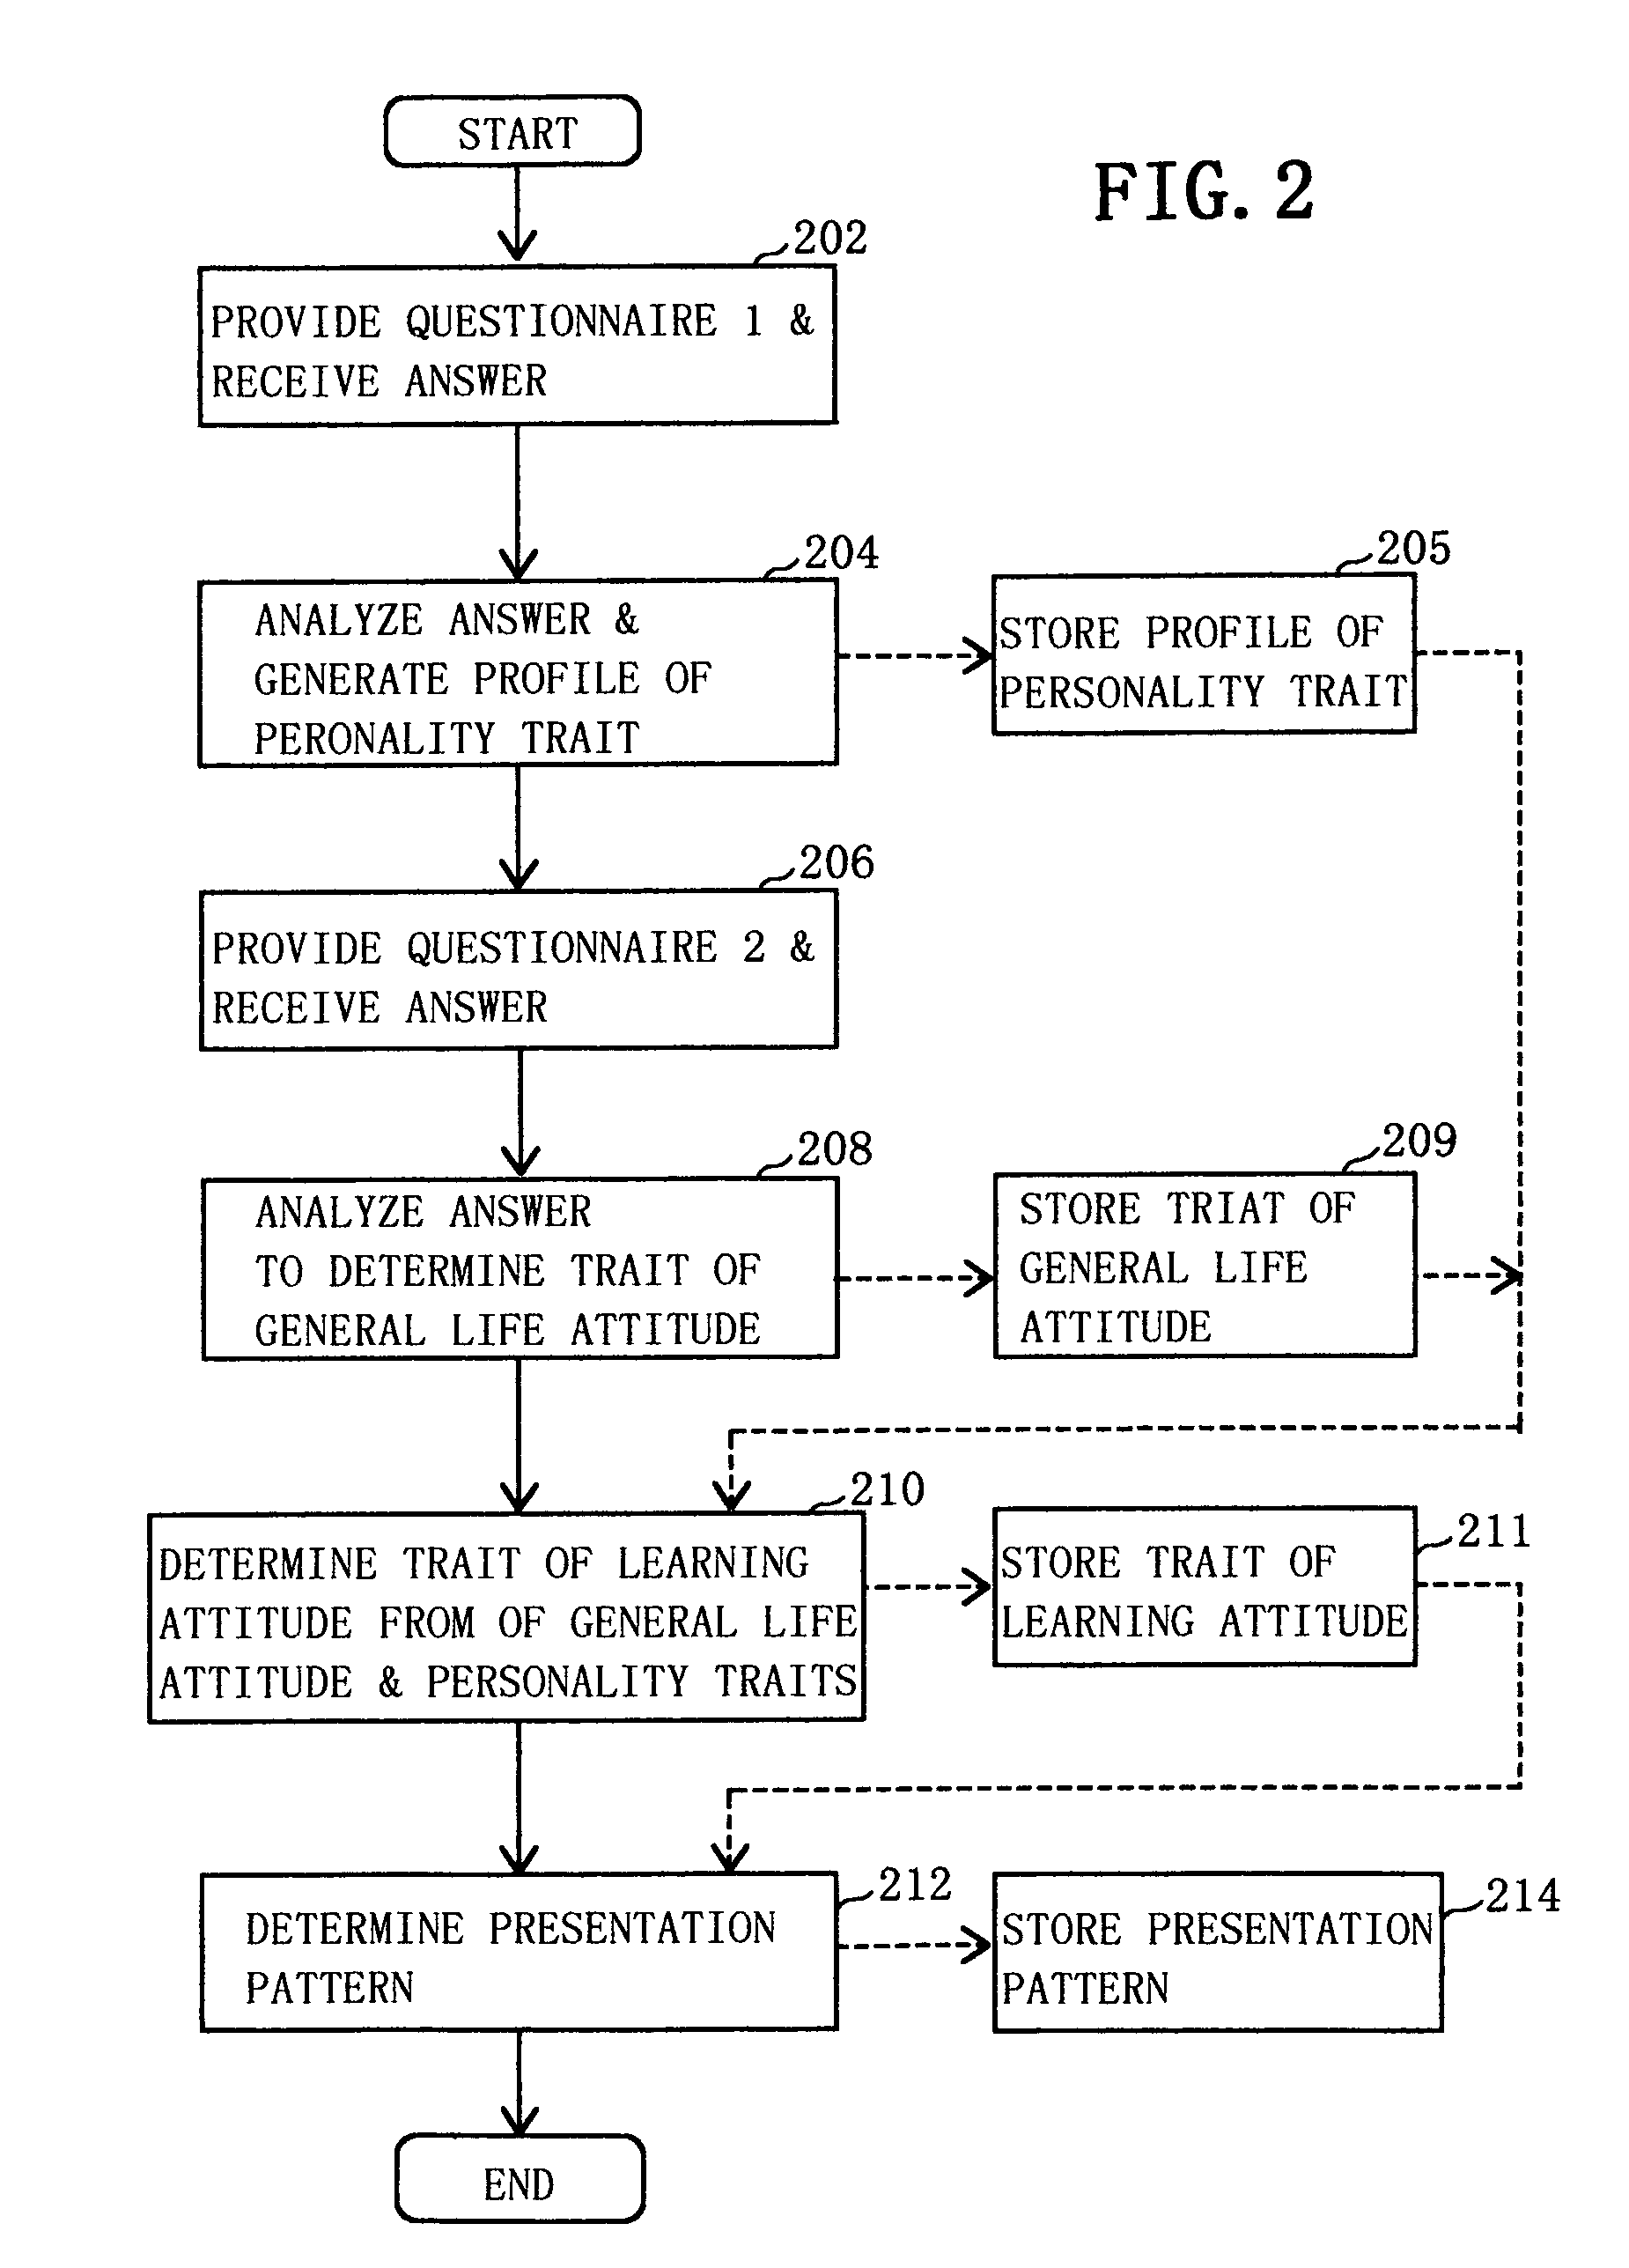 Computer-assisted education apparatus and method for adaptively determining presentation pattern of teaching materials